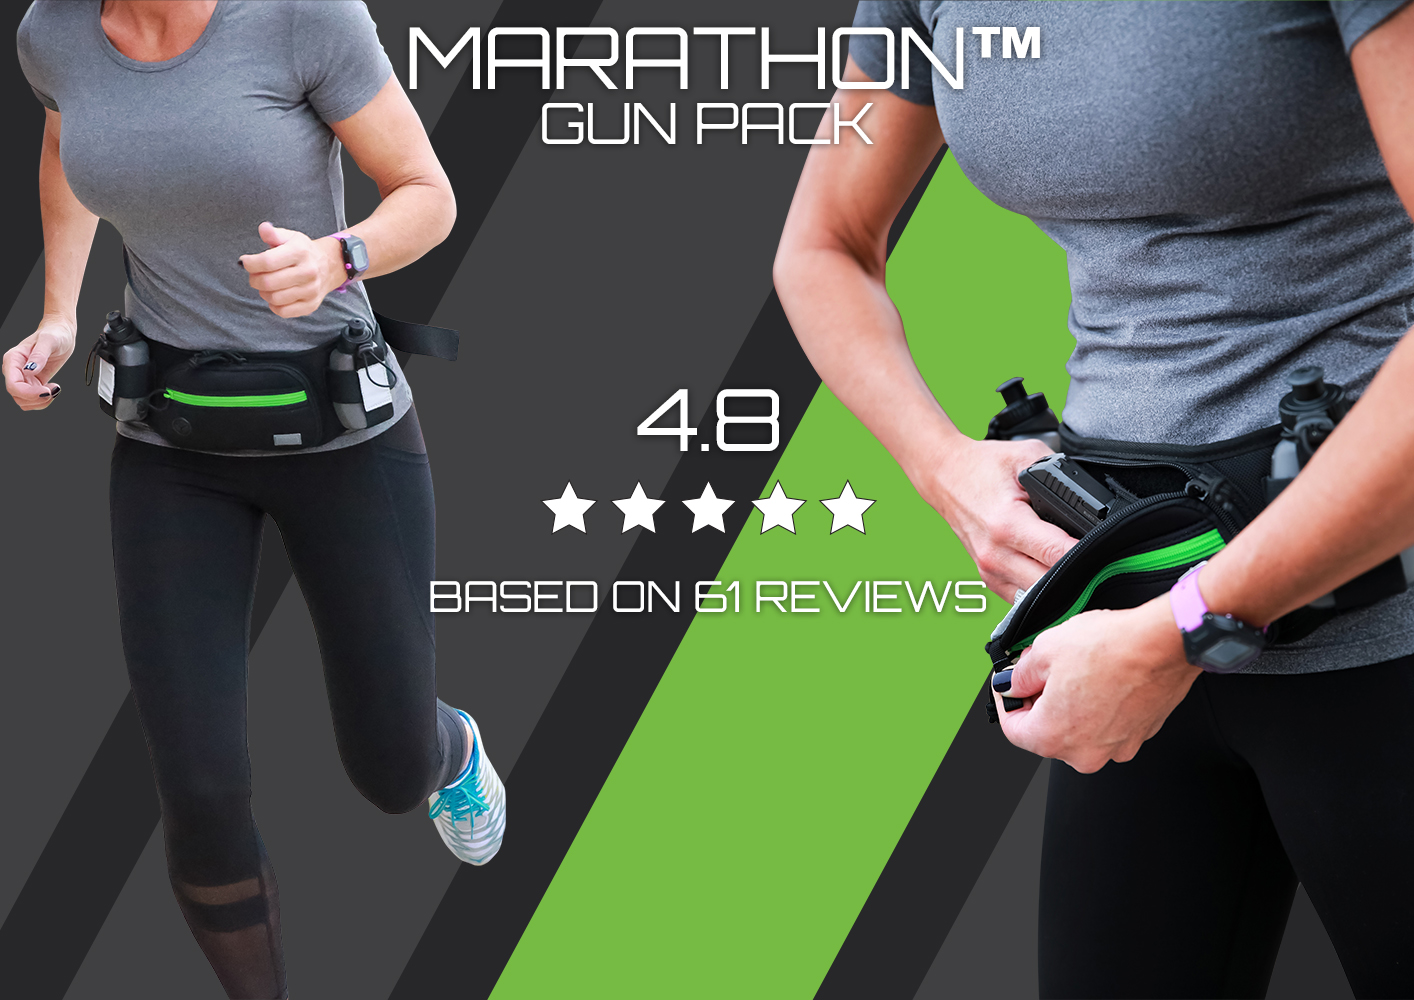 Elite Survival Marathon Gun Pack - Concealed Carry Holster Pack for Active Lifestyles. Lightweight and Durable Design. Order Now for Secure Carry!